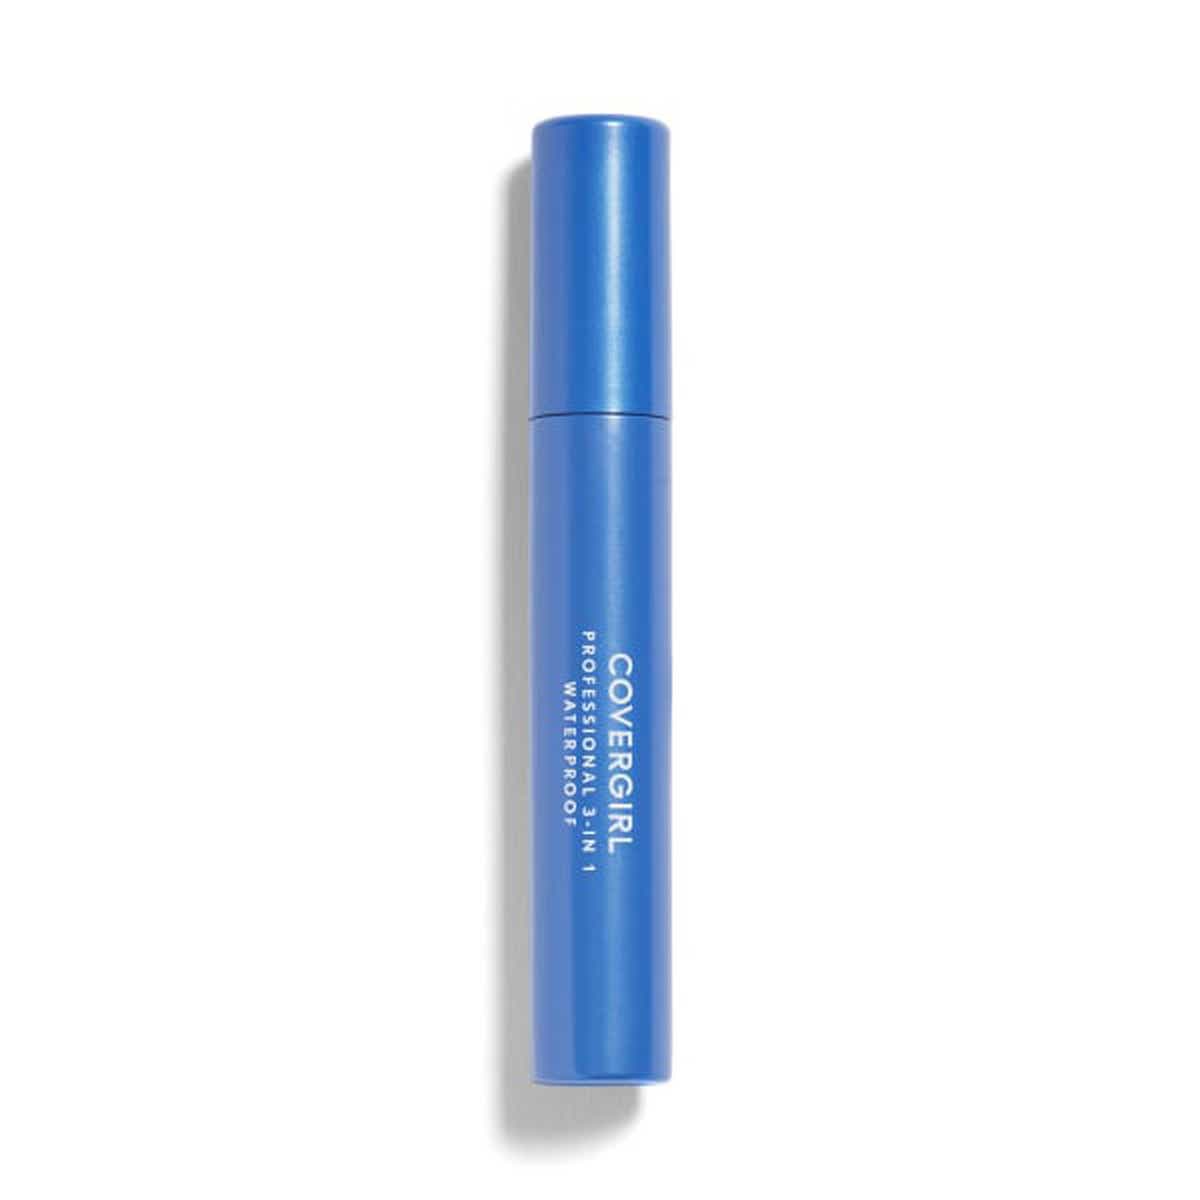 COVERGIRL PRO 3-N-1 Water Proof Mascara